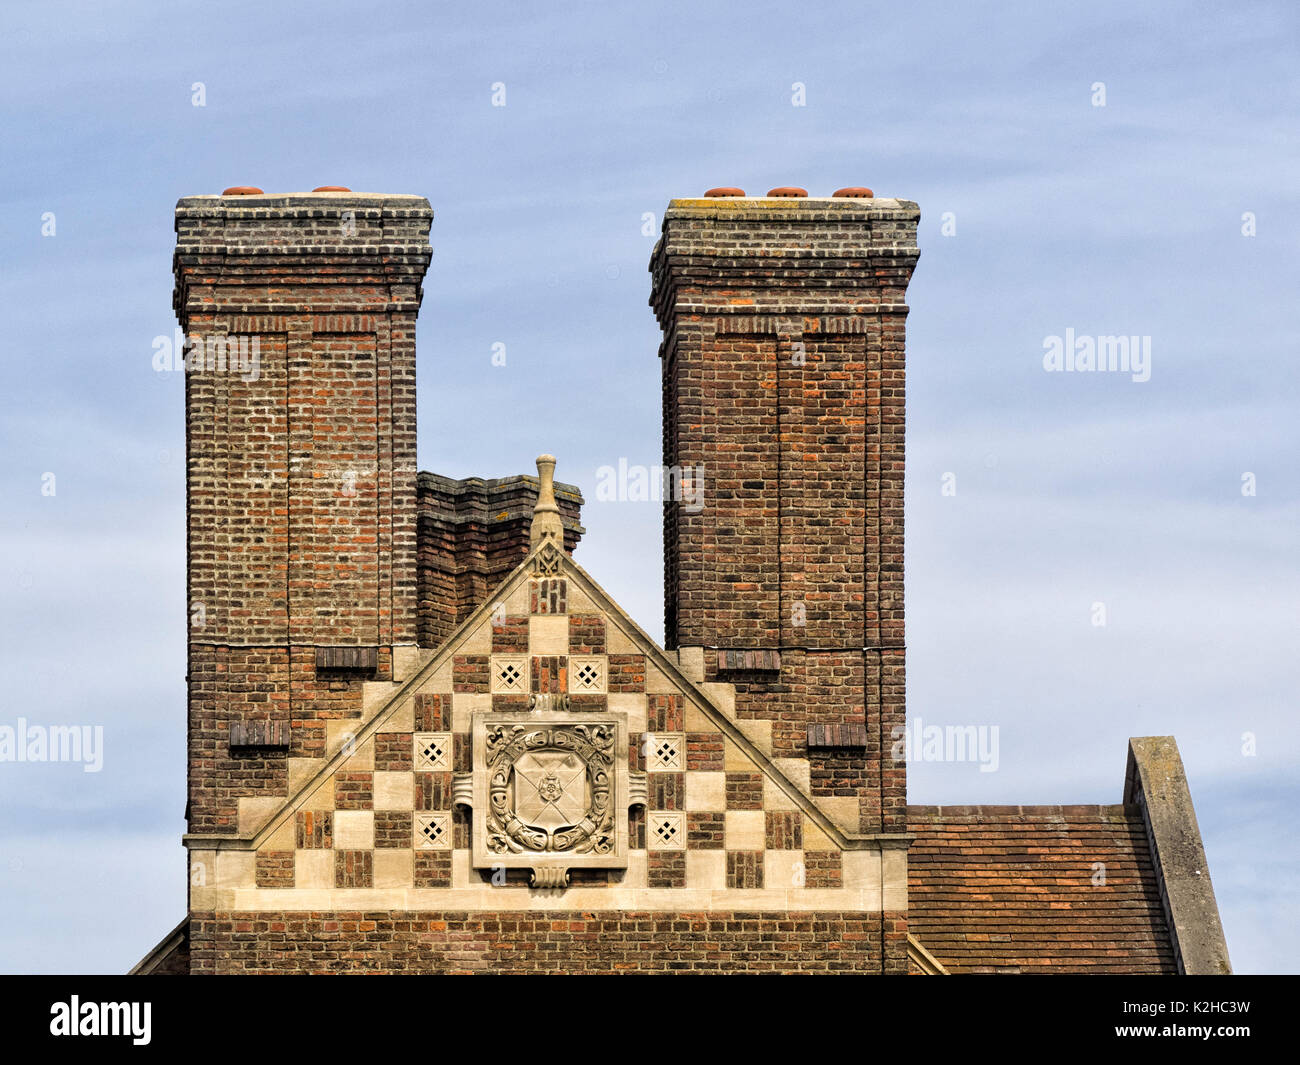 CAMBRIDGE, UK - AUGUST 11, 2017:  The impressive brick chimneys and gable on the Magdalene College building Stock Photo